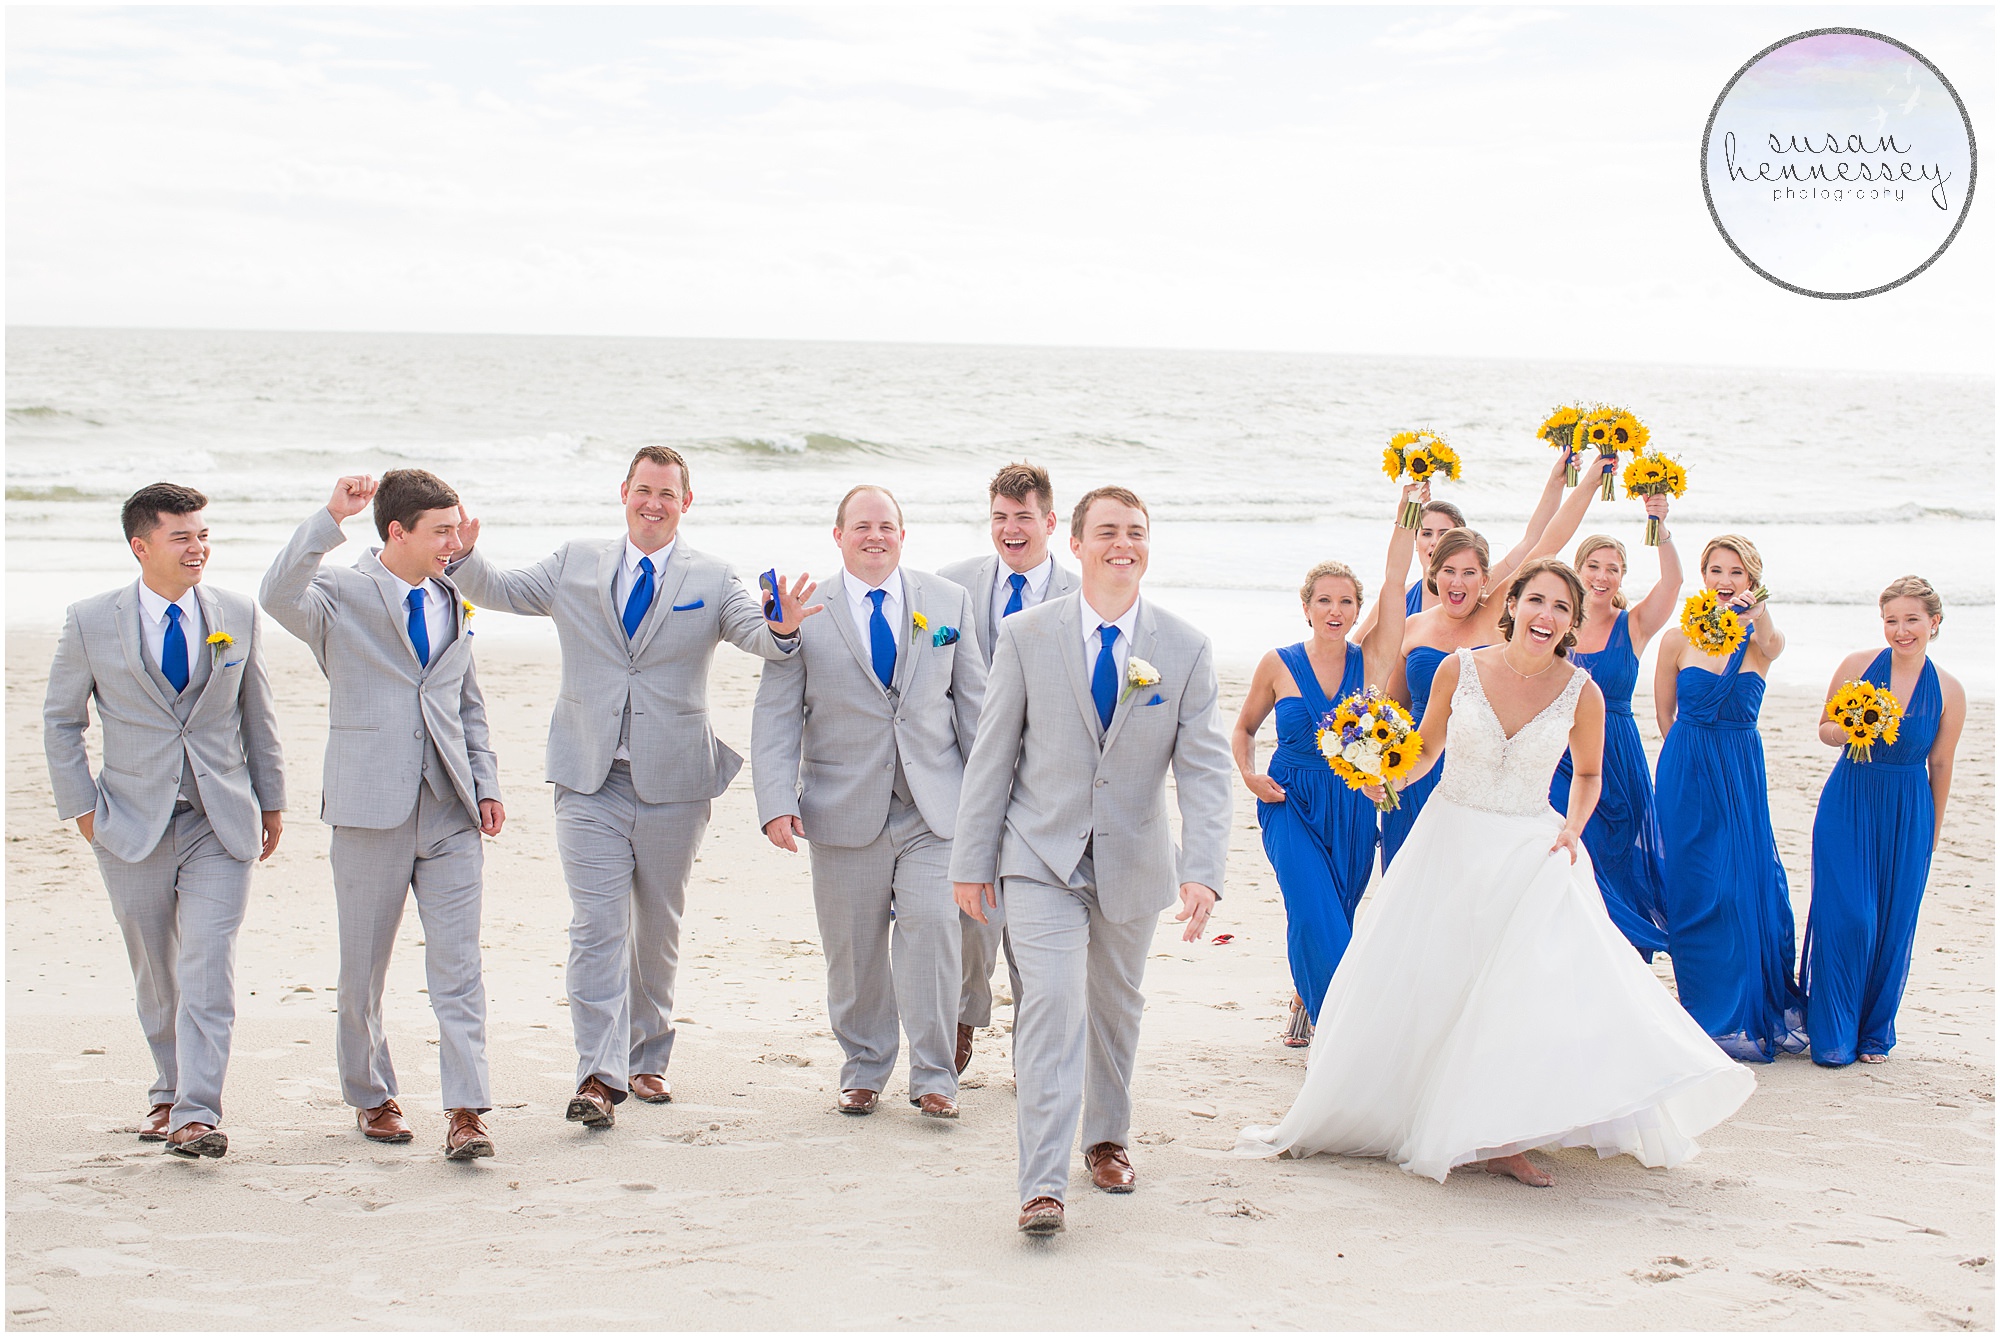 Bridal party on the beach at Grand Hotel wedding in Cape May